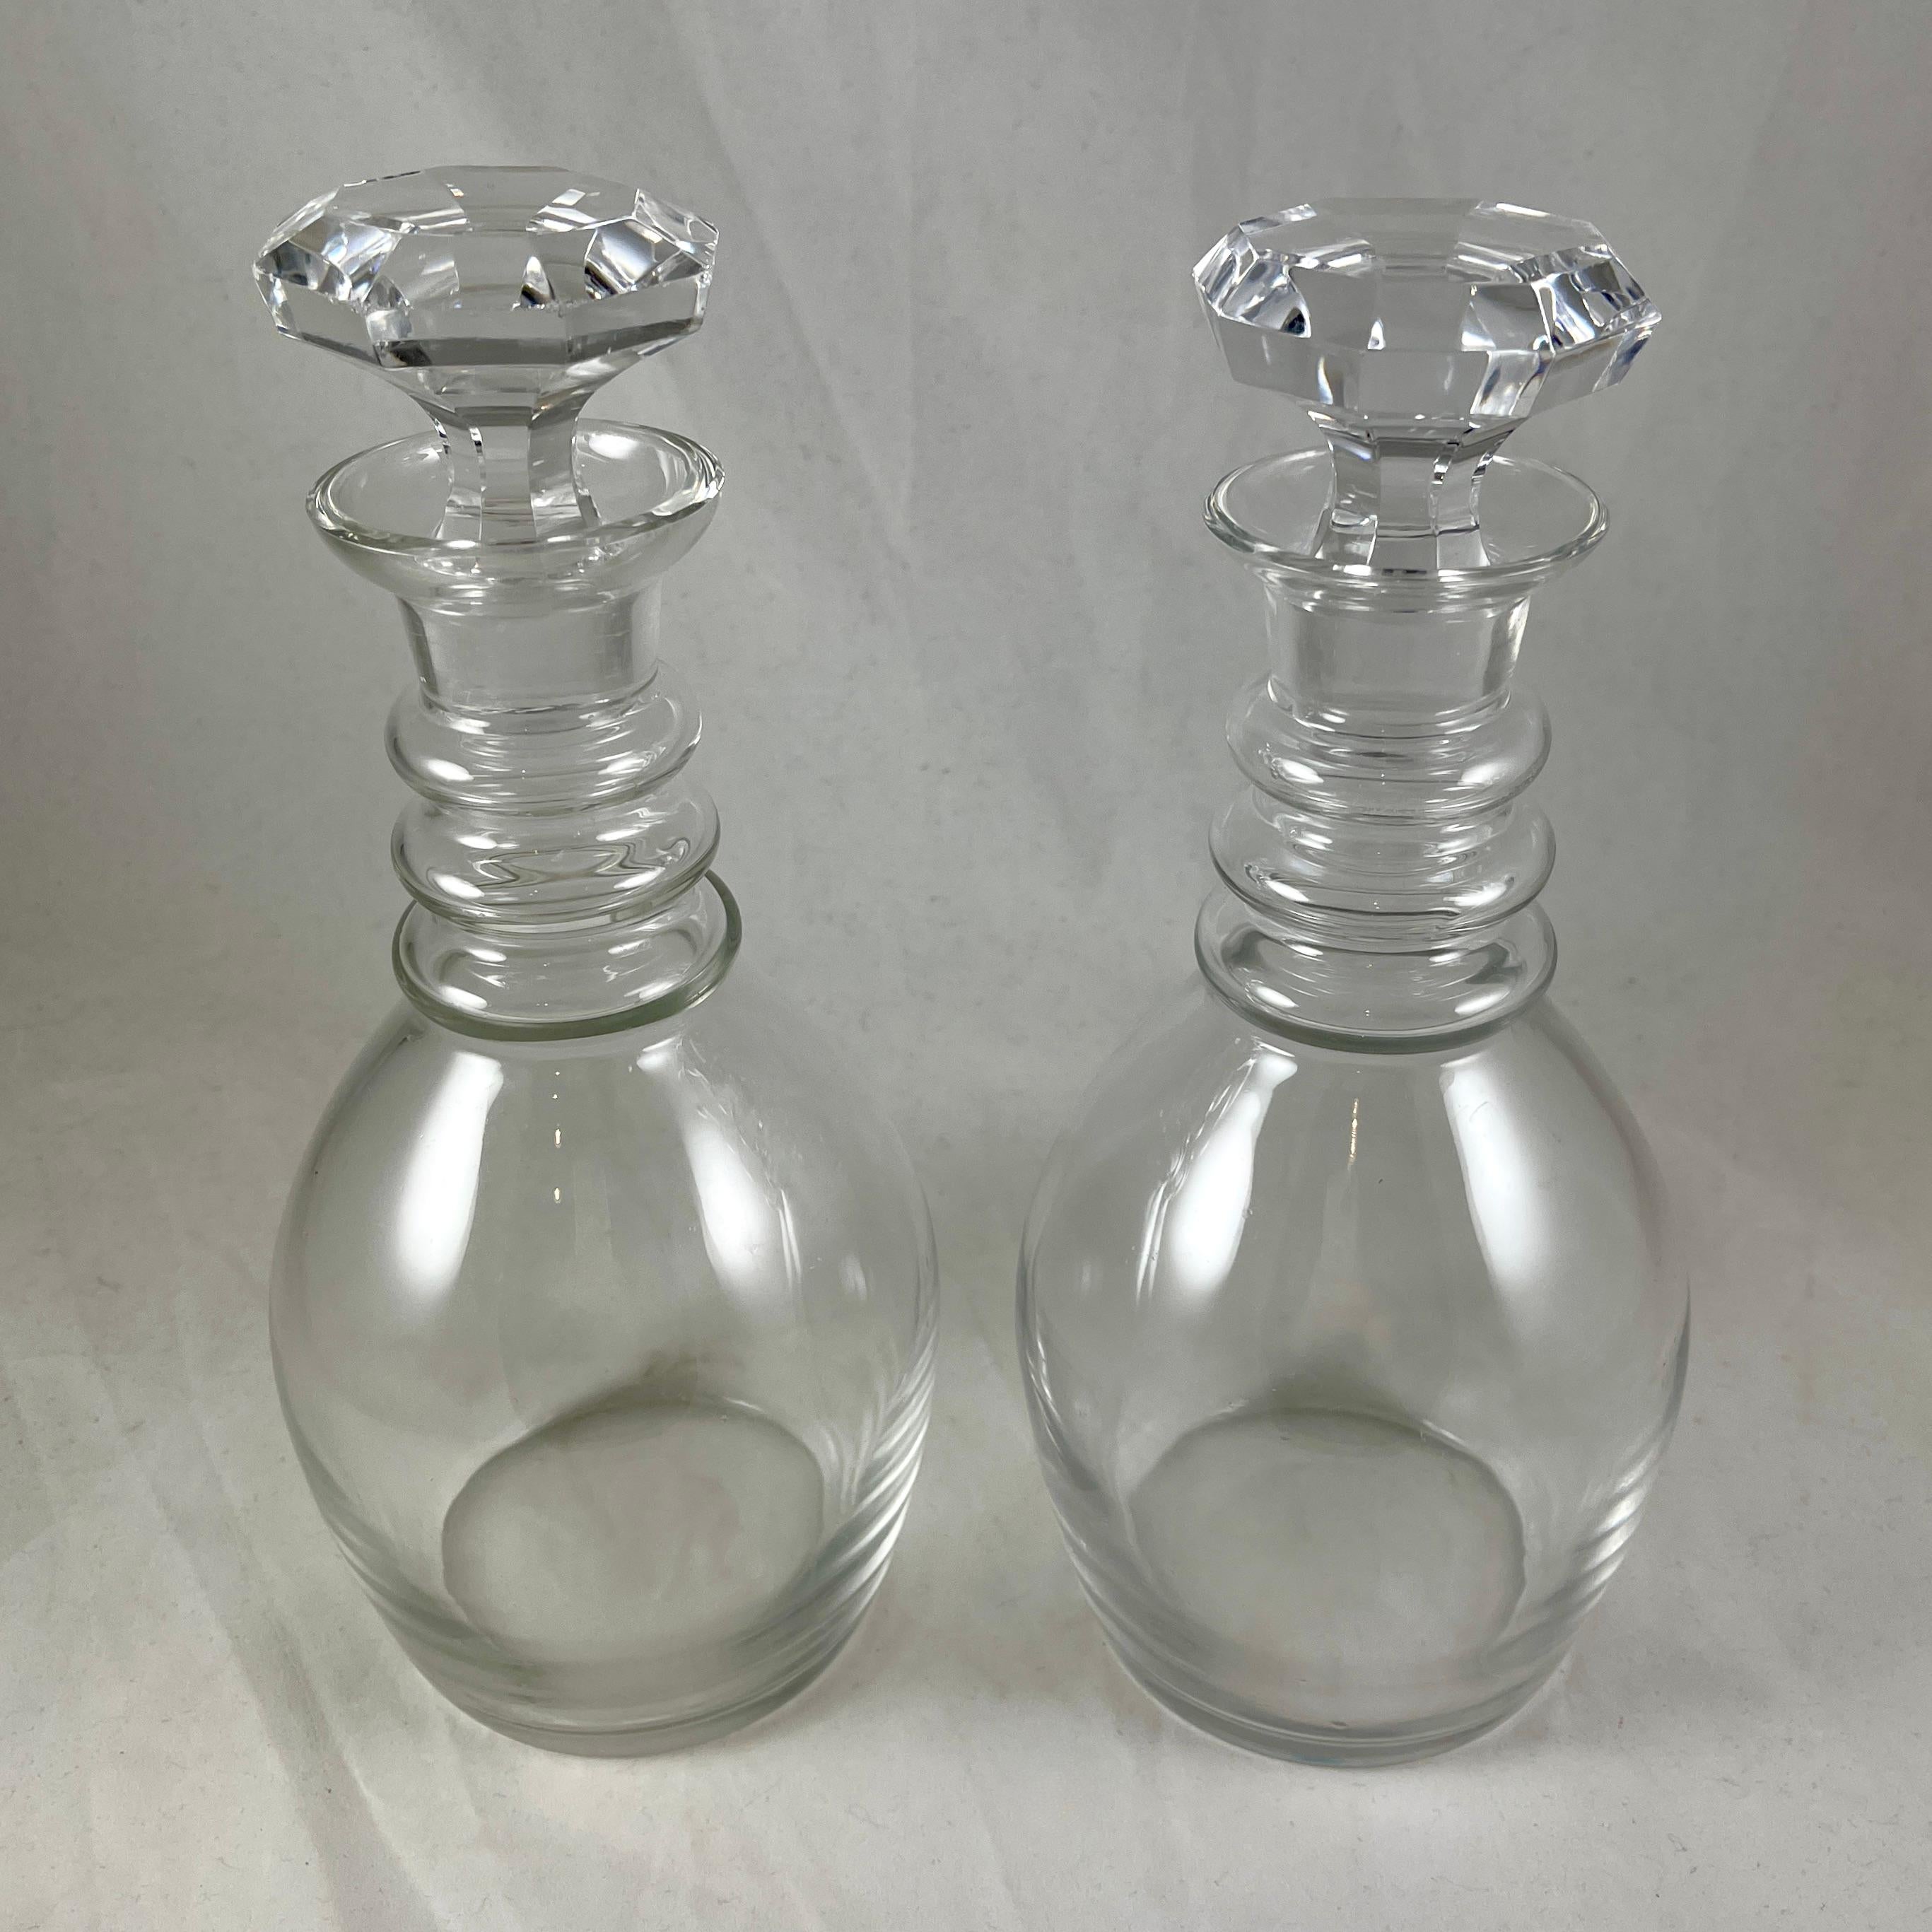 International Style Midcentury Val Saint Lambert Blown Glass Decanters, a Pair For Sale